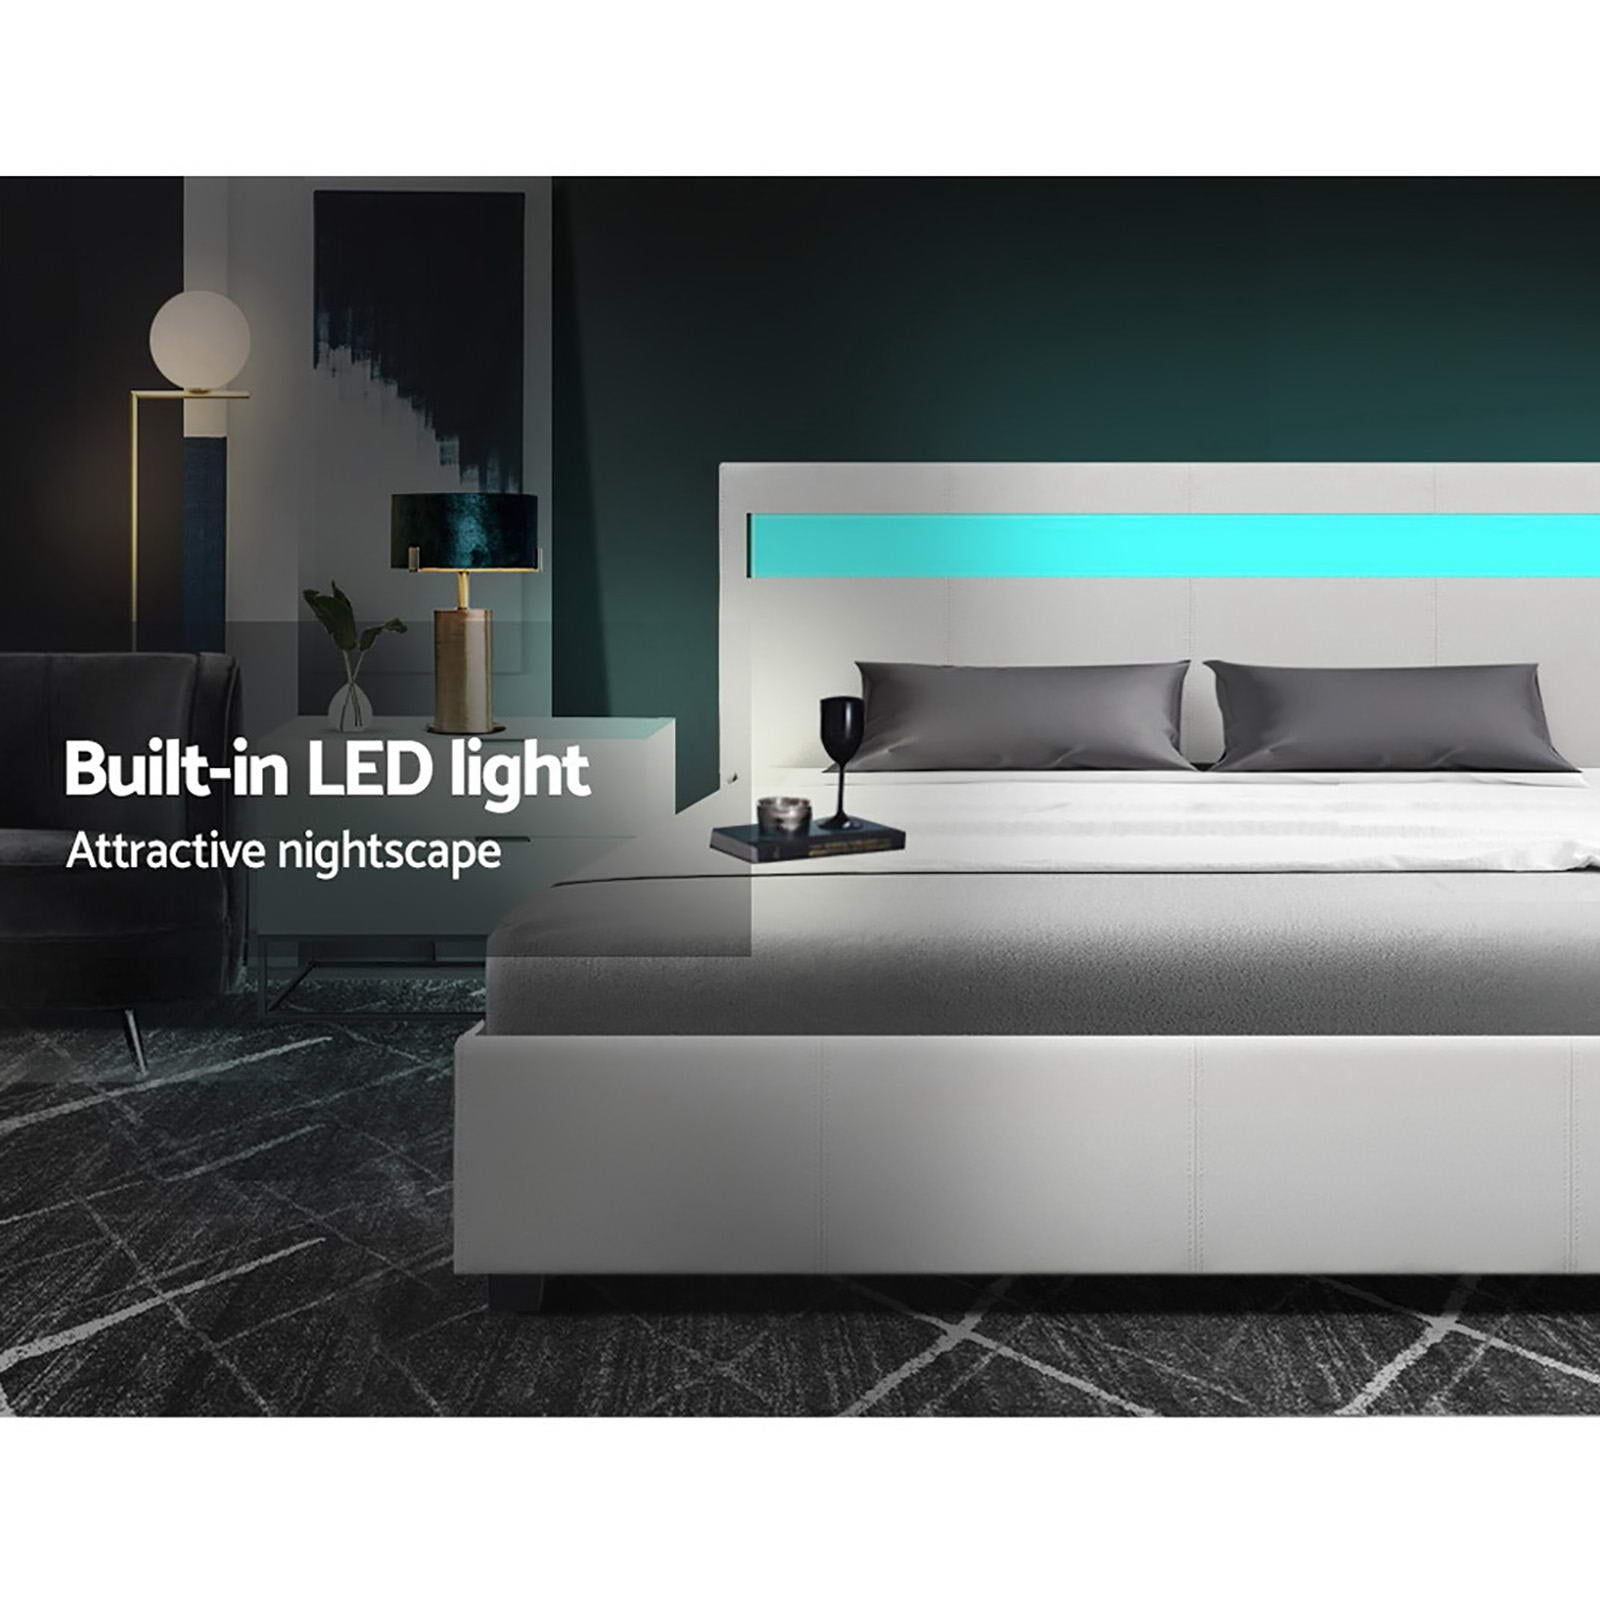 Bed Frame Double Size Led Gas Lift White Cole